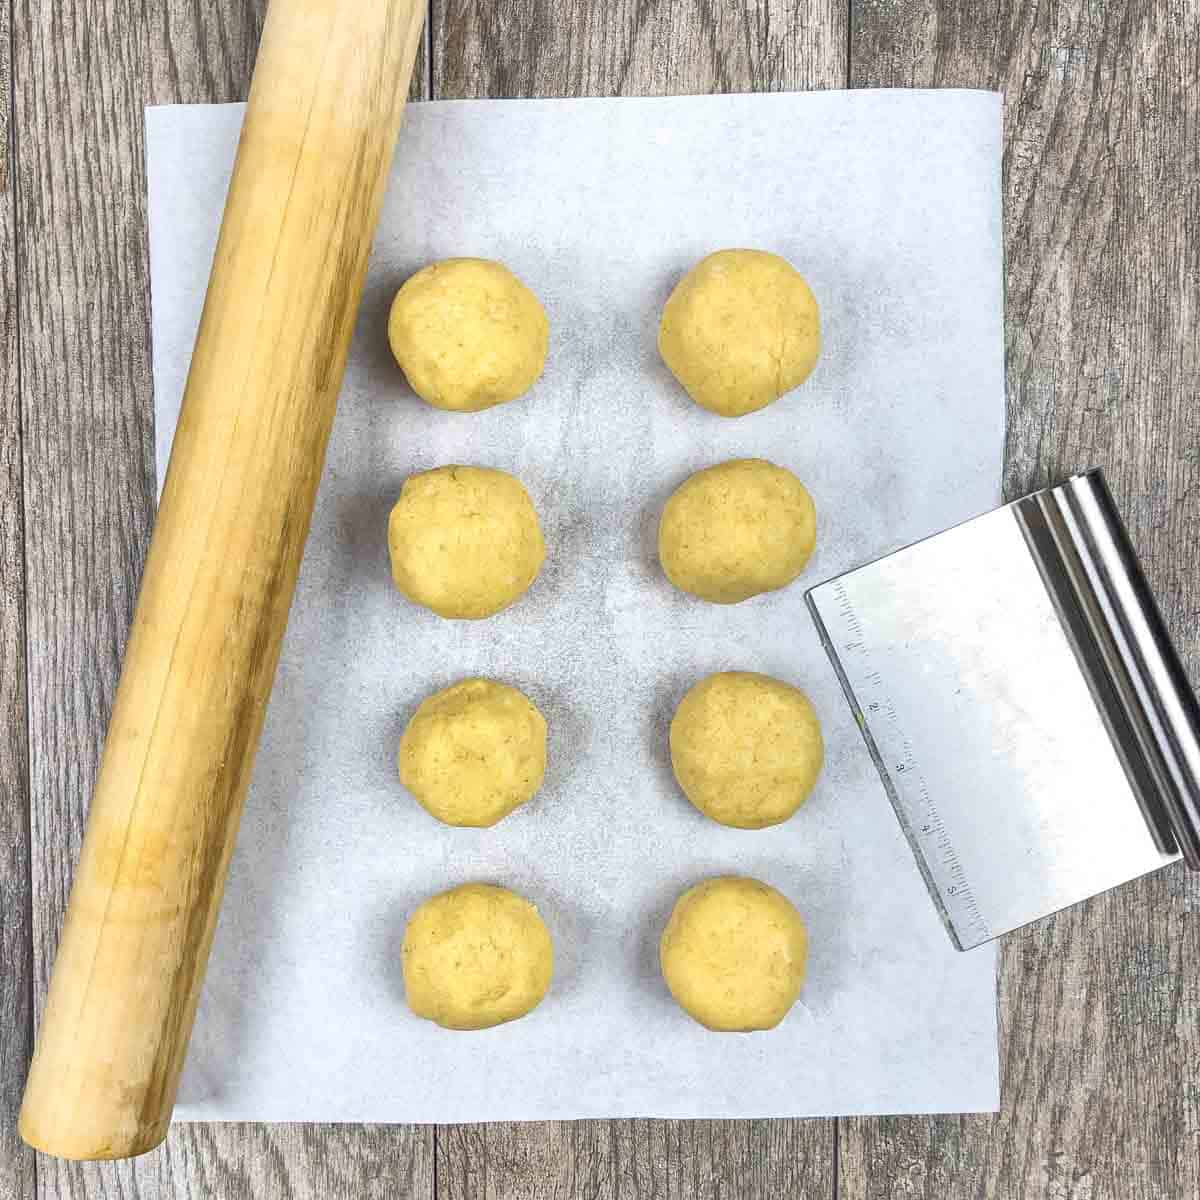 Eight small balls of dough on parchment paper with a rolling pin and a dough cutter.